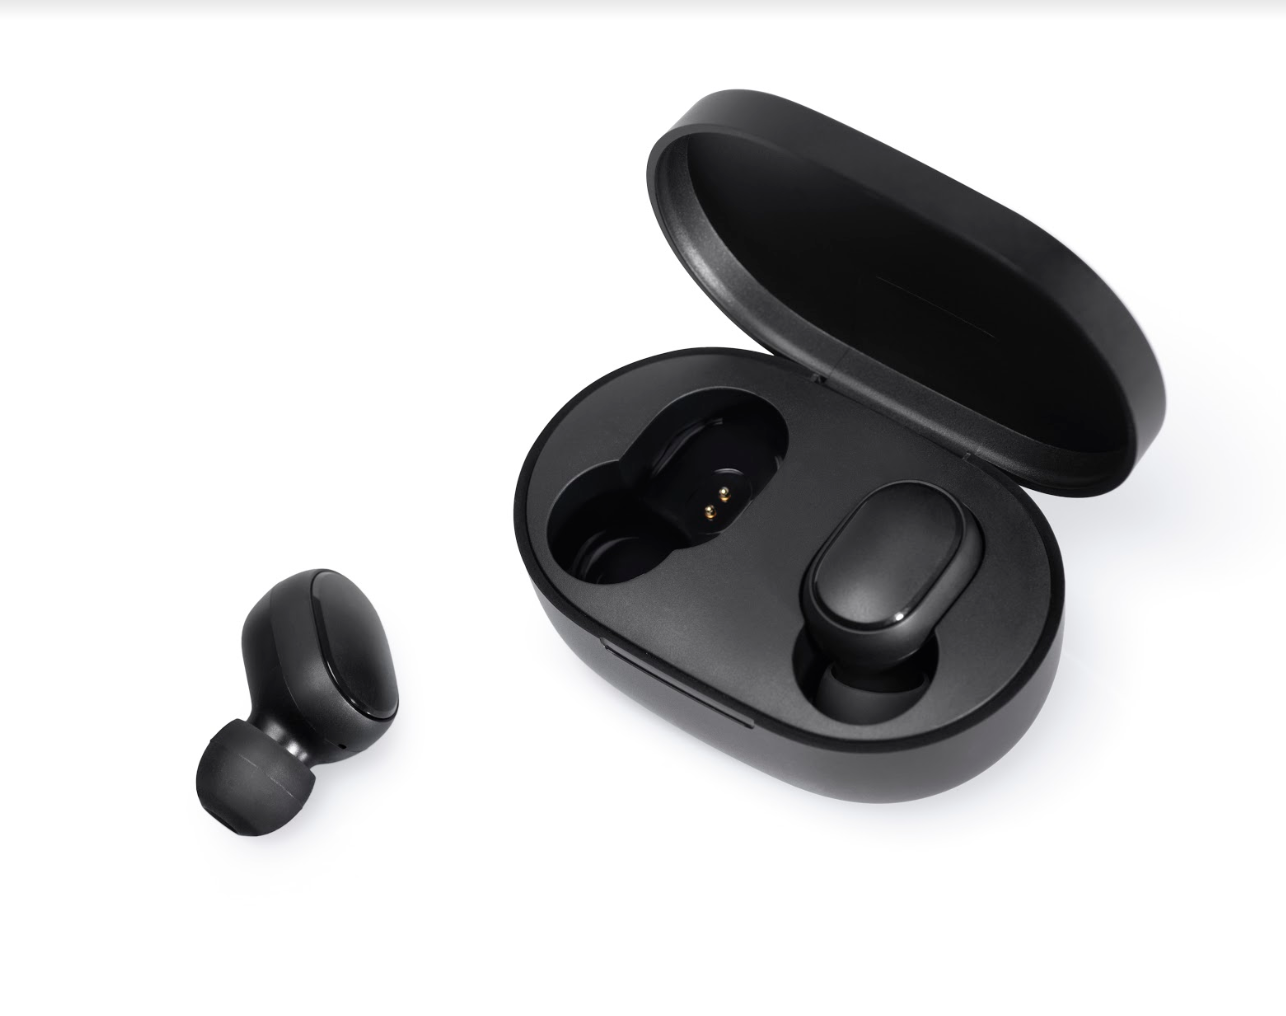 Xiaomi launches Redmi Earbuds S wireless earphones at Rs 1,799 - Latest ...